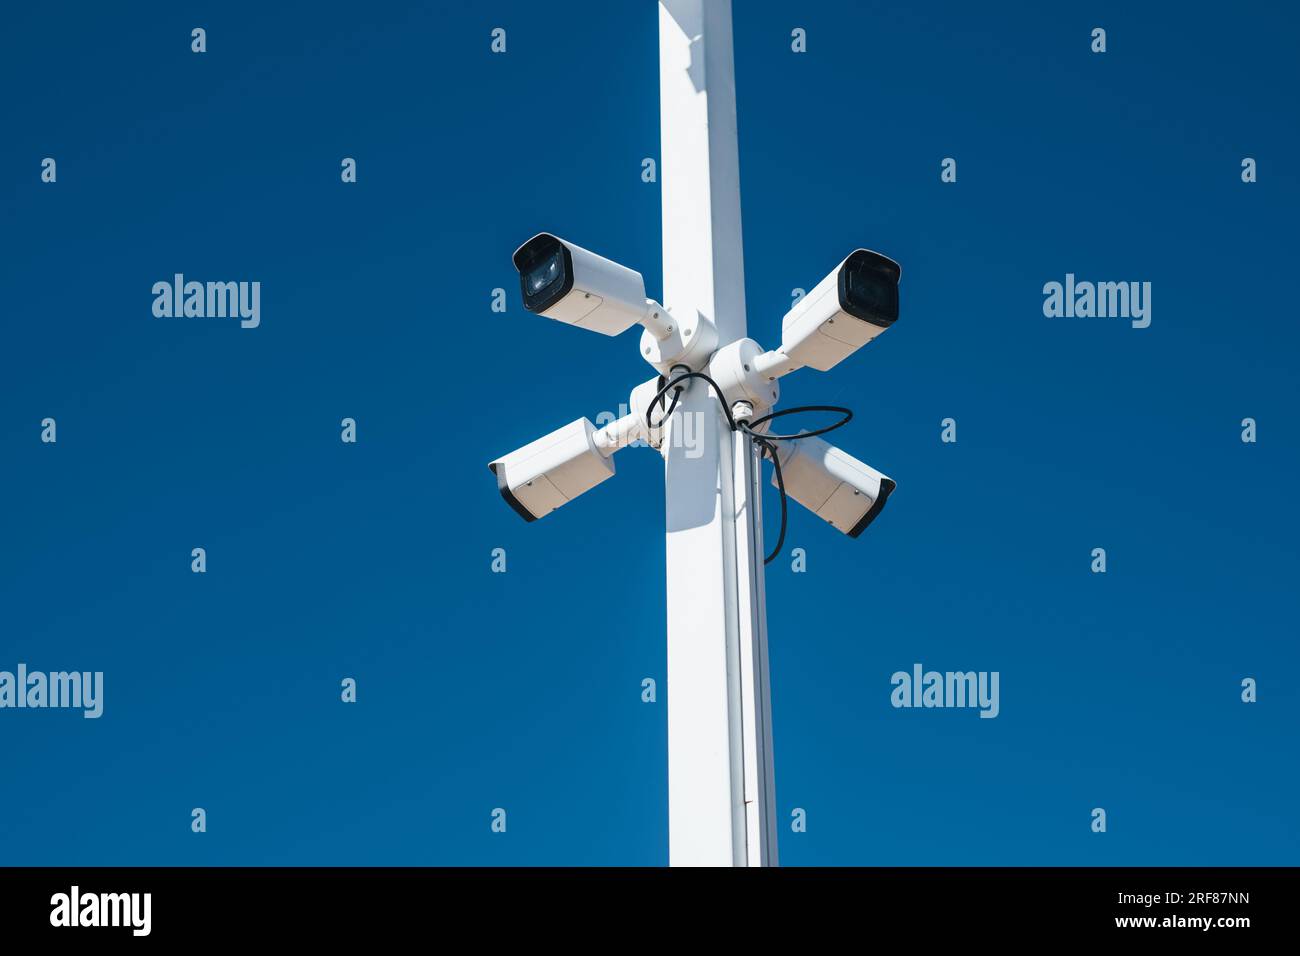 Security video cameras on a pole on blue sky background Stock Photo